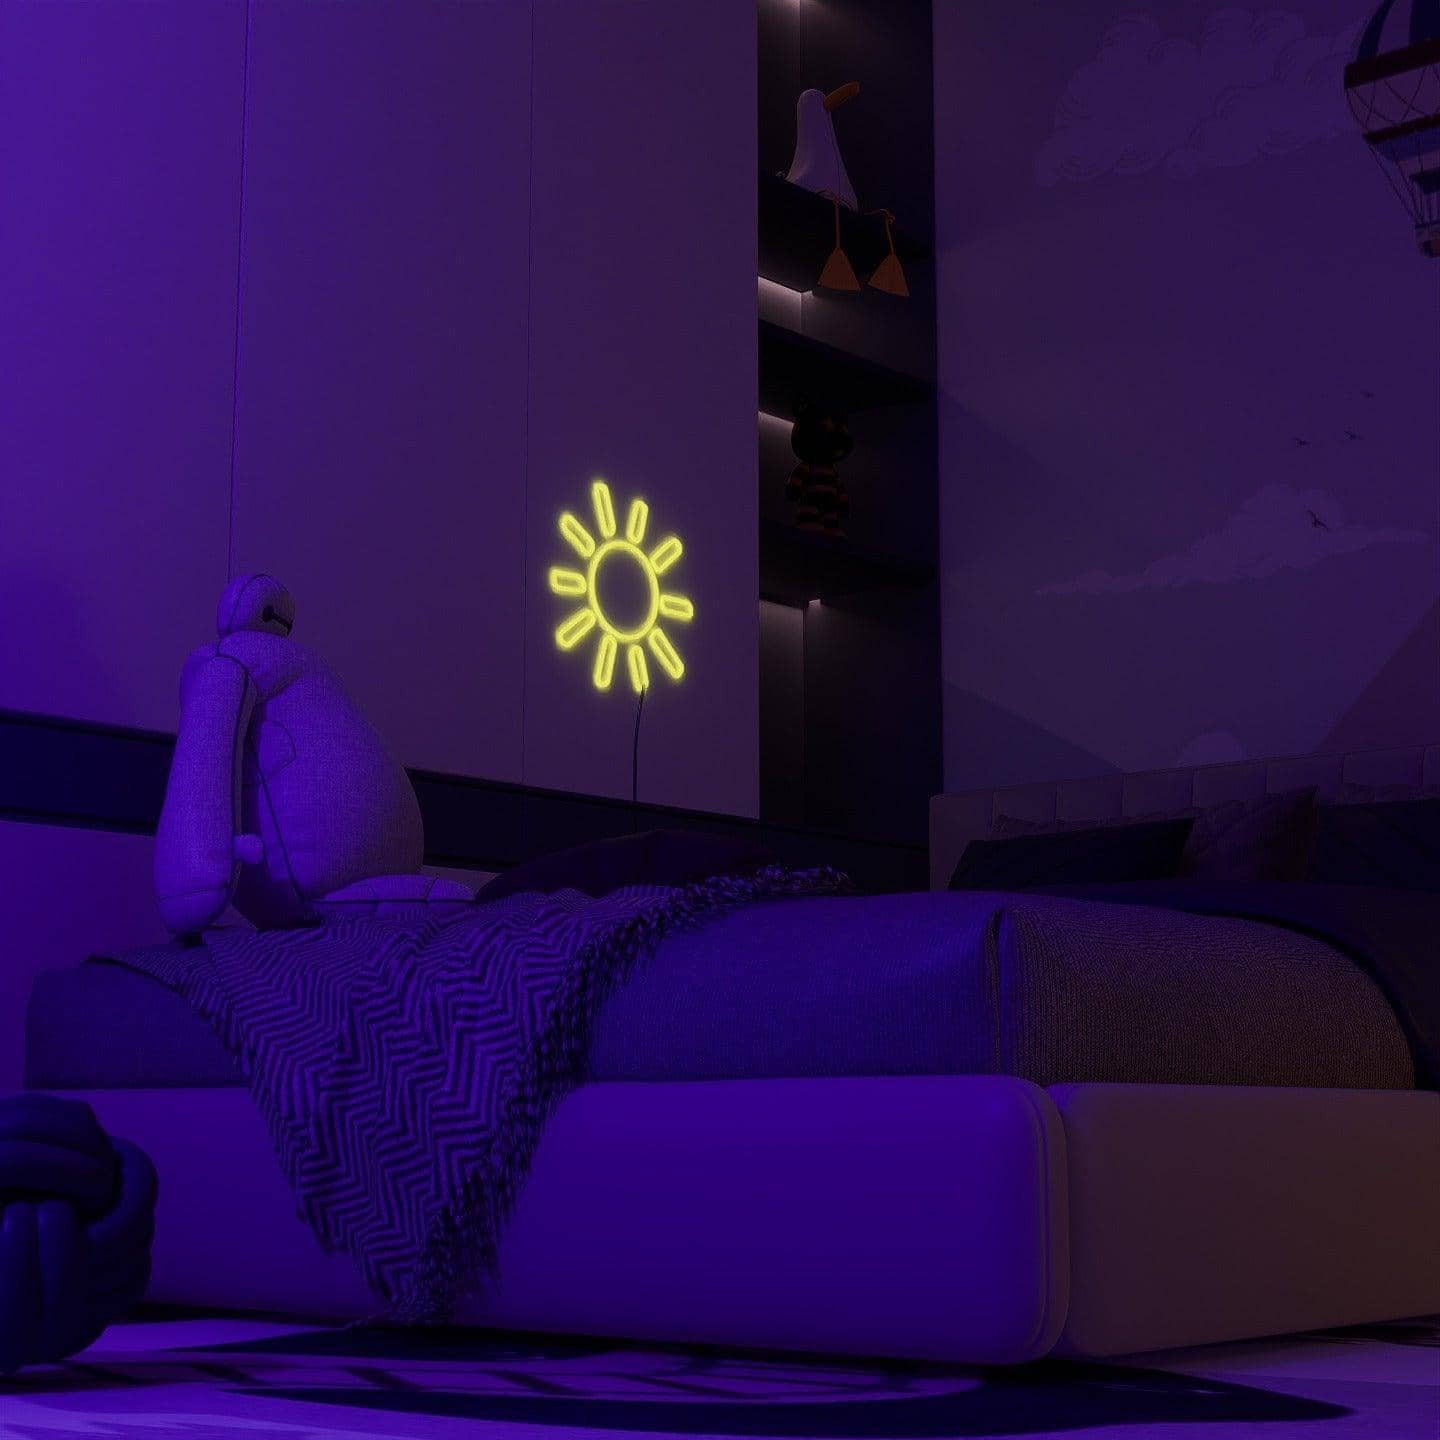 light-up-neon-lights-and-hang-them-in-your-bedroom-for-display-solar-burst